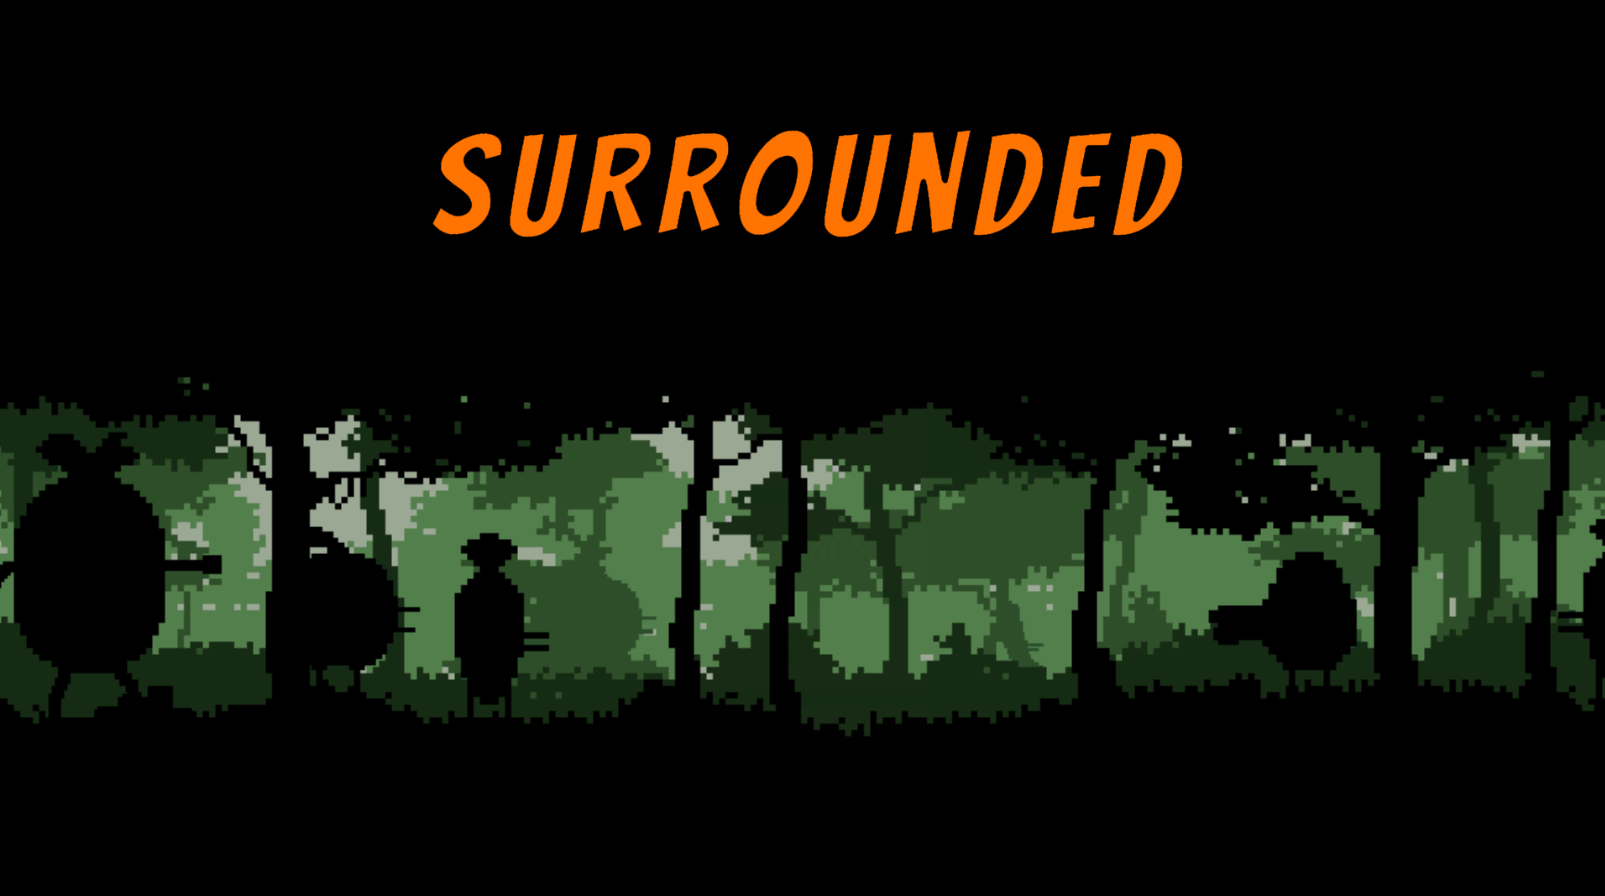 Surrounded